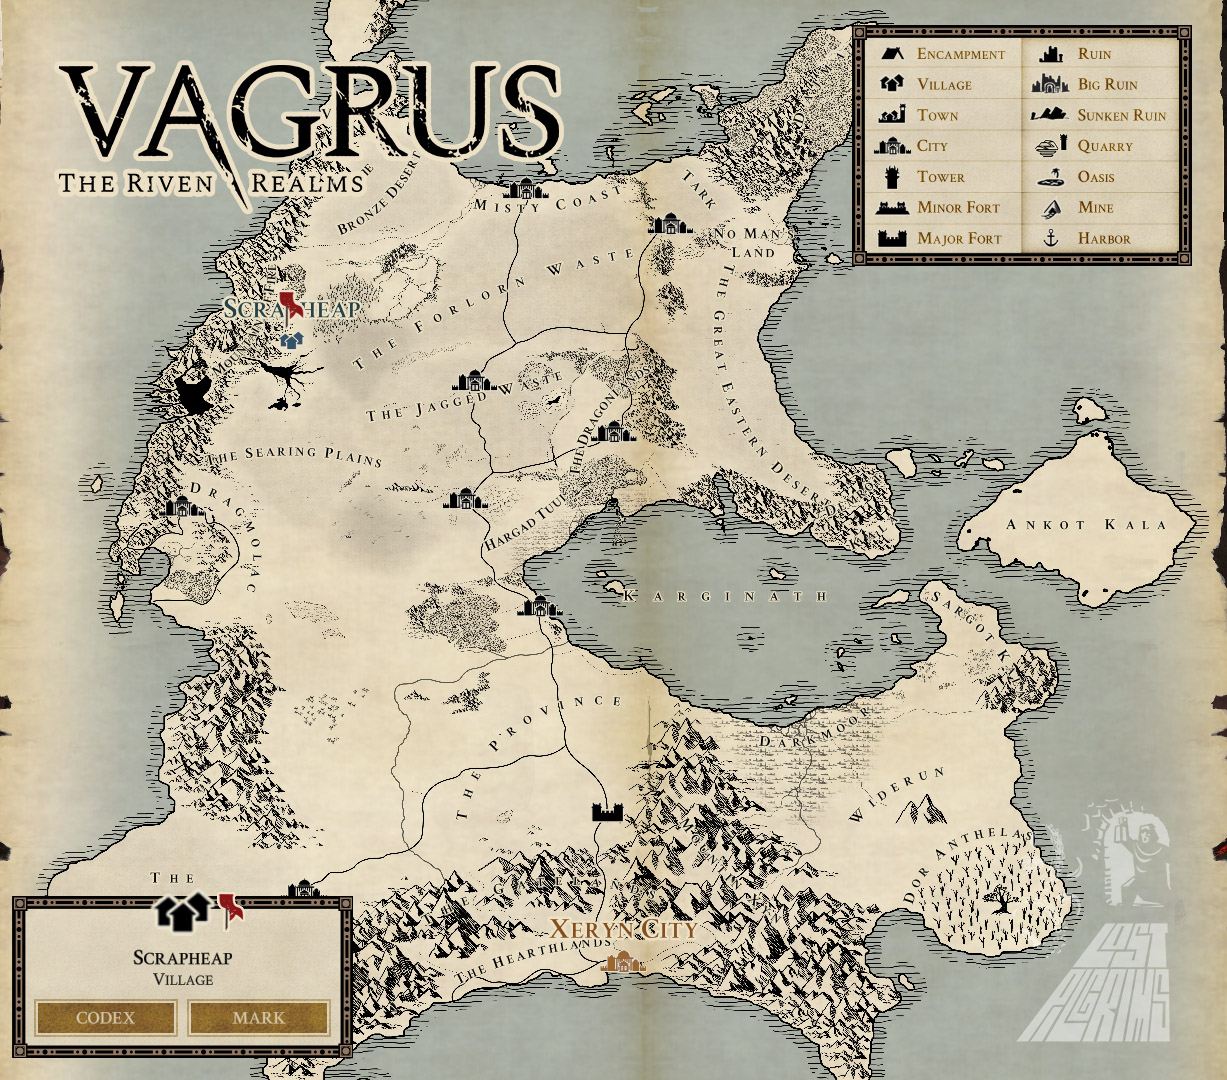 free for apple download Vagrus - The Riven Realms